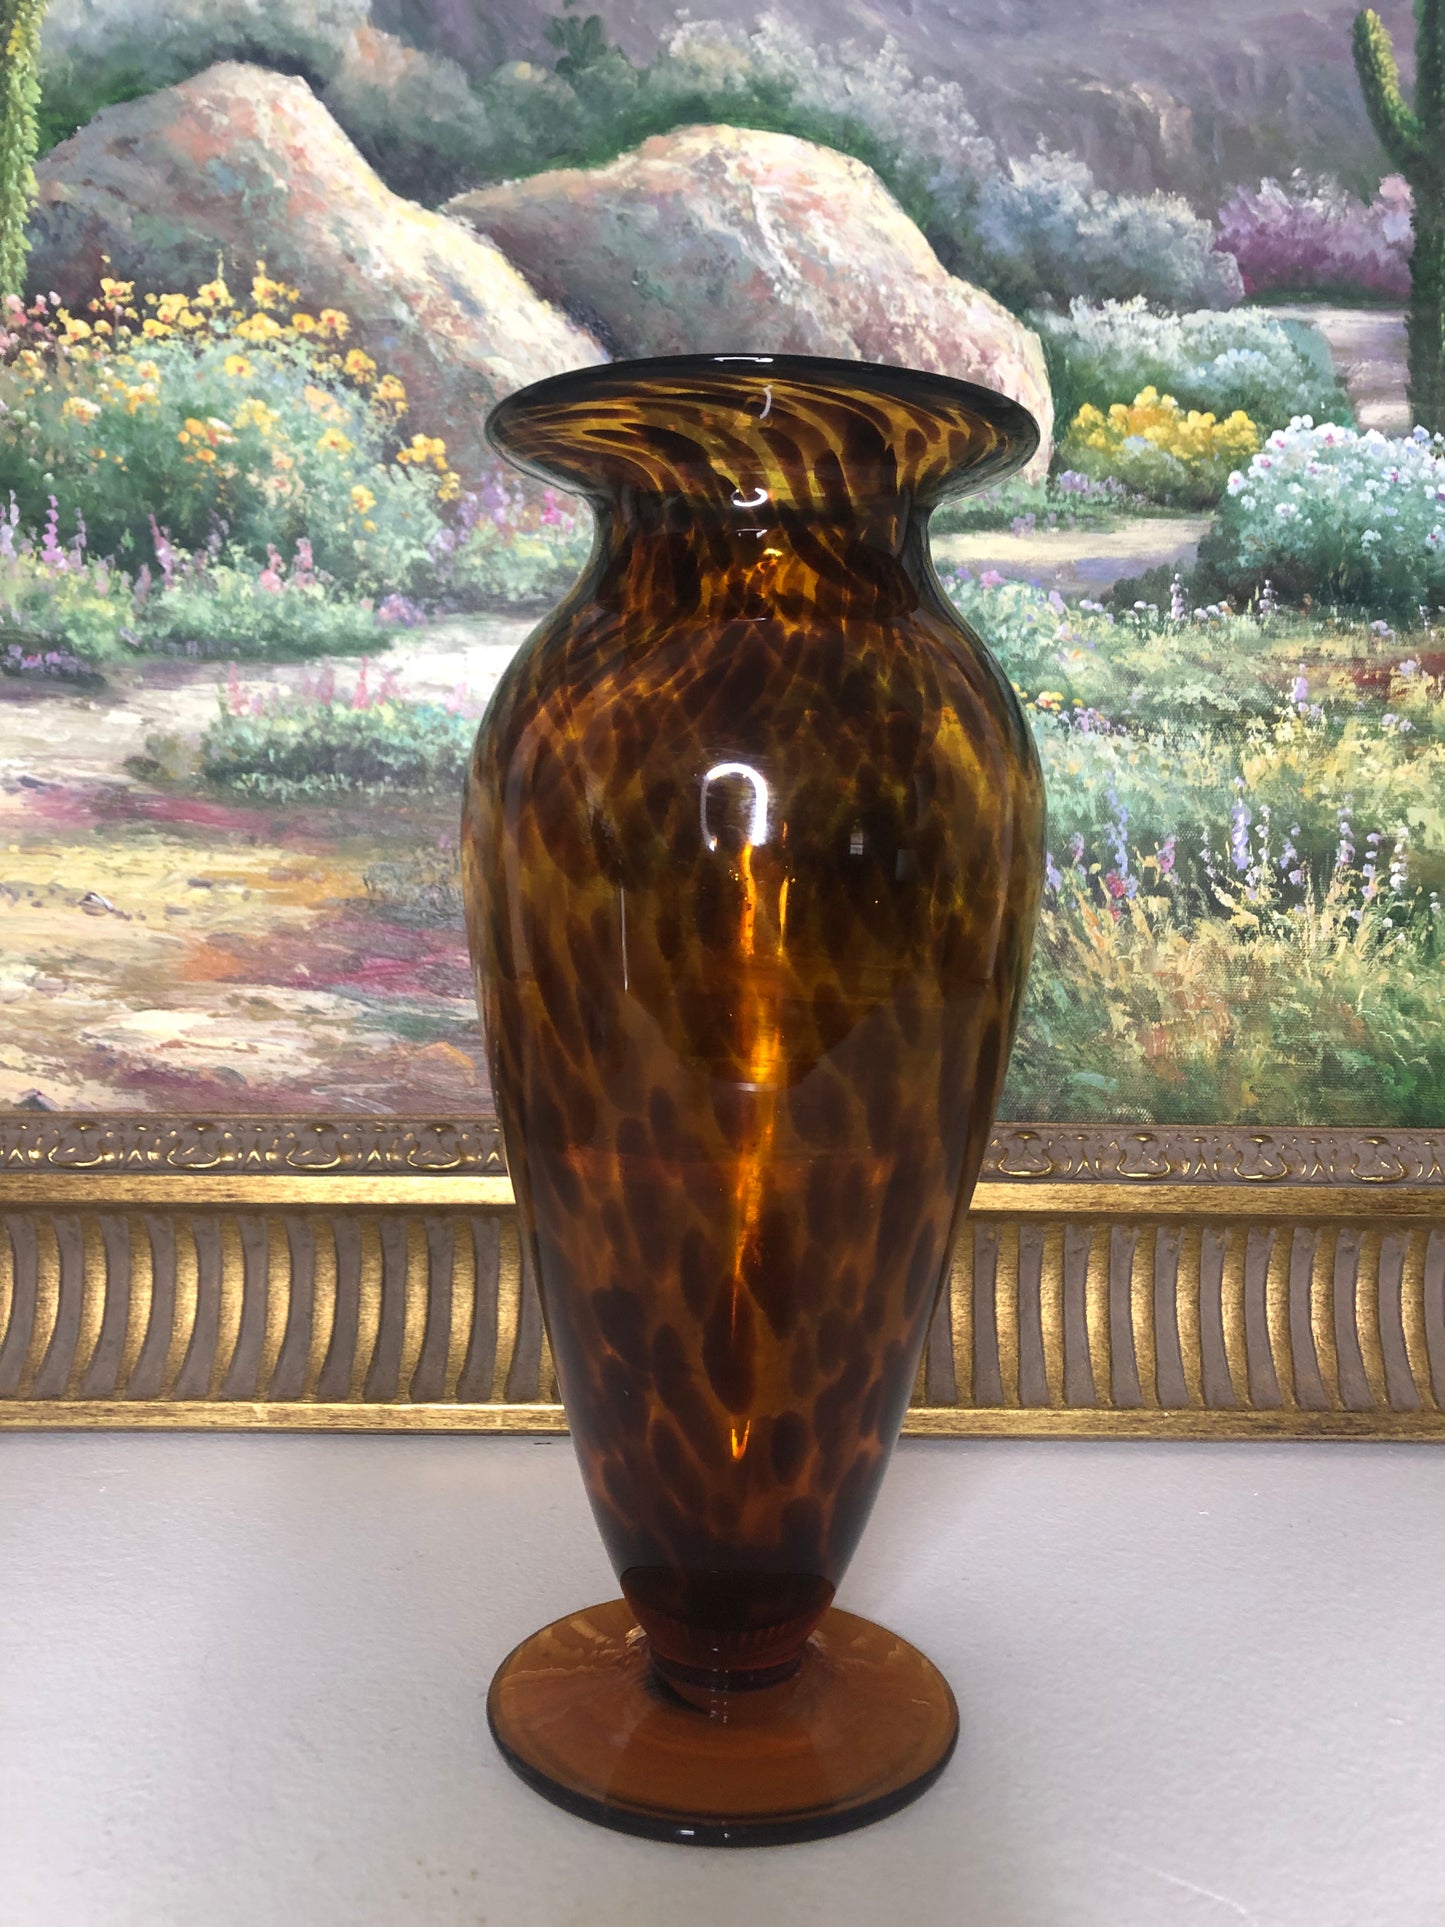 Gorgeous Tortoise Hand Blown Glass 10” tall vase- Excellent condition!